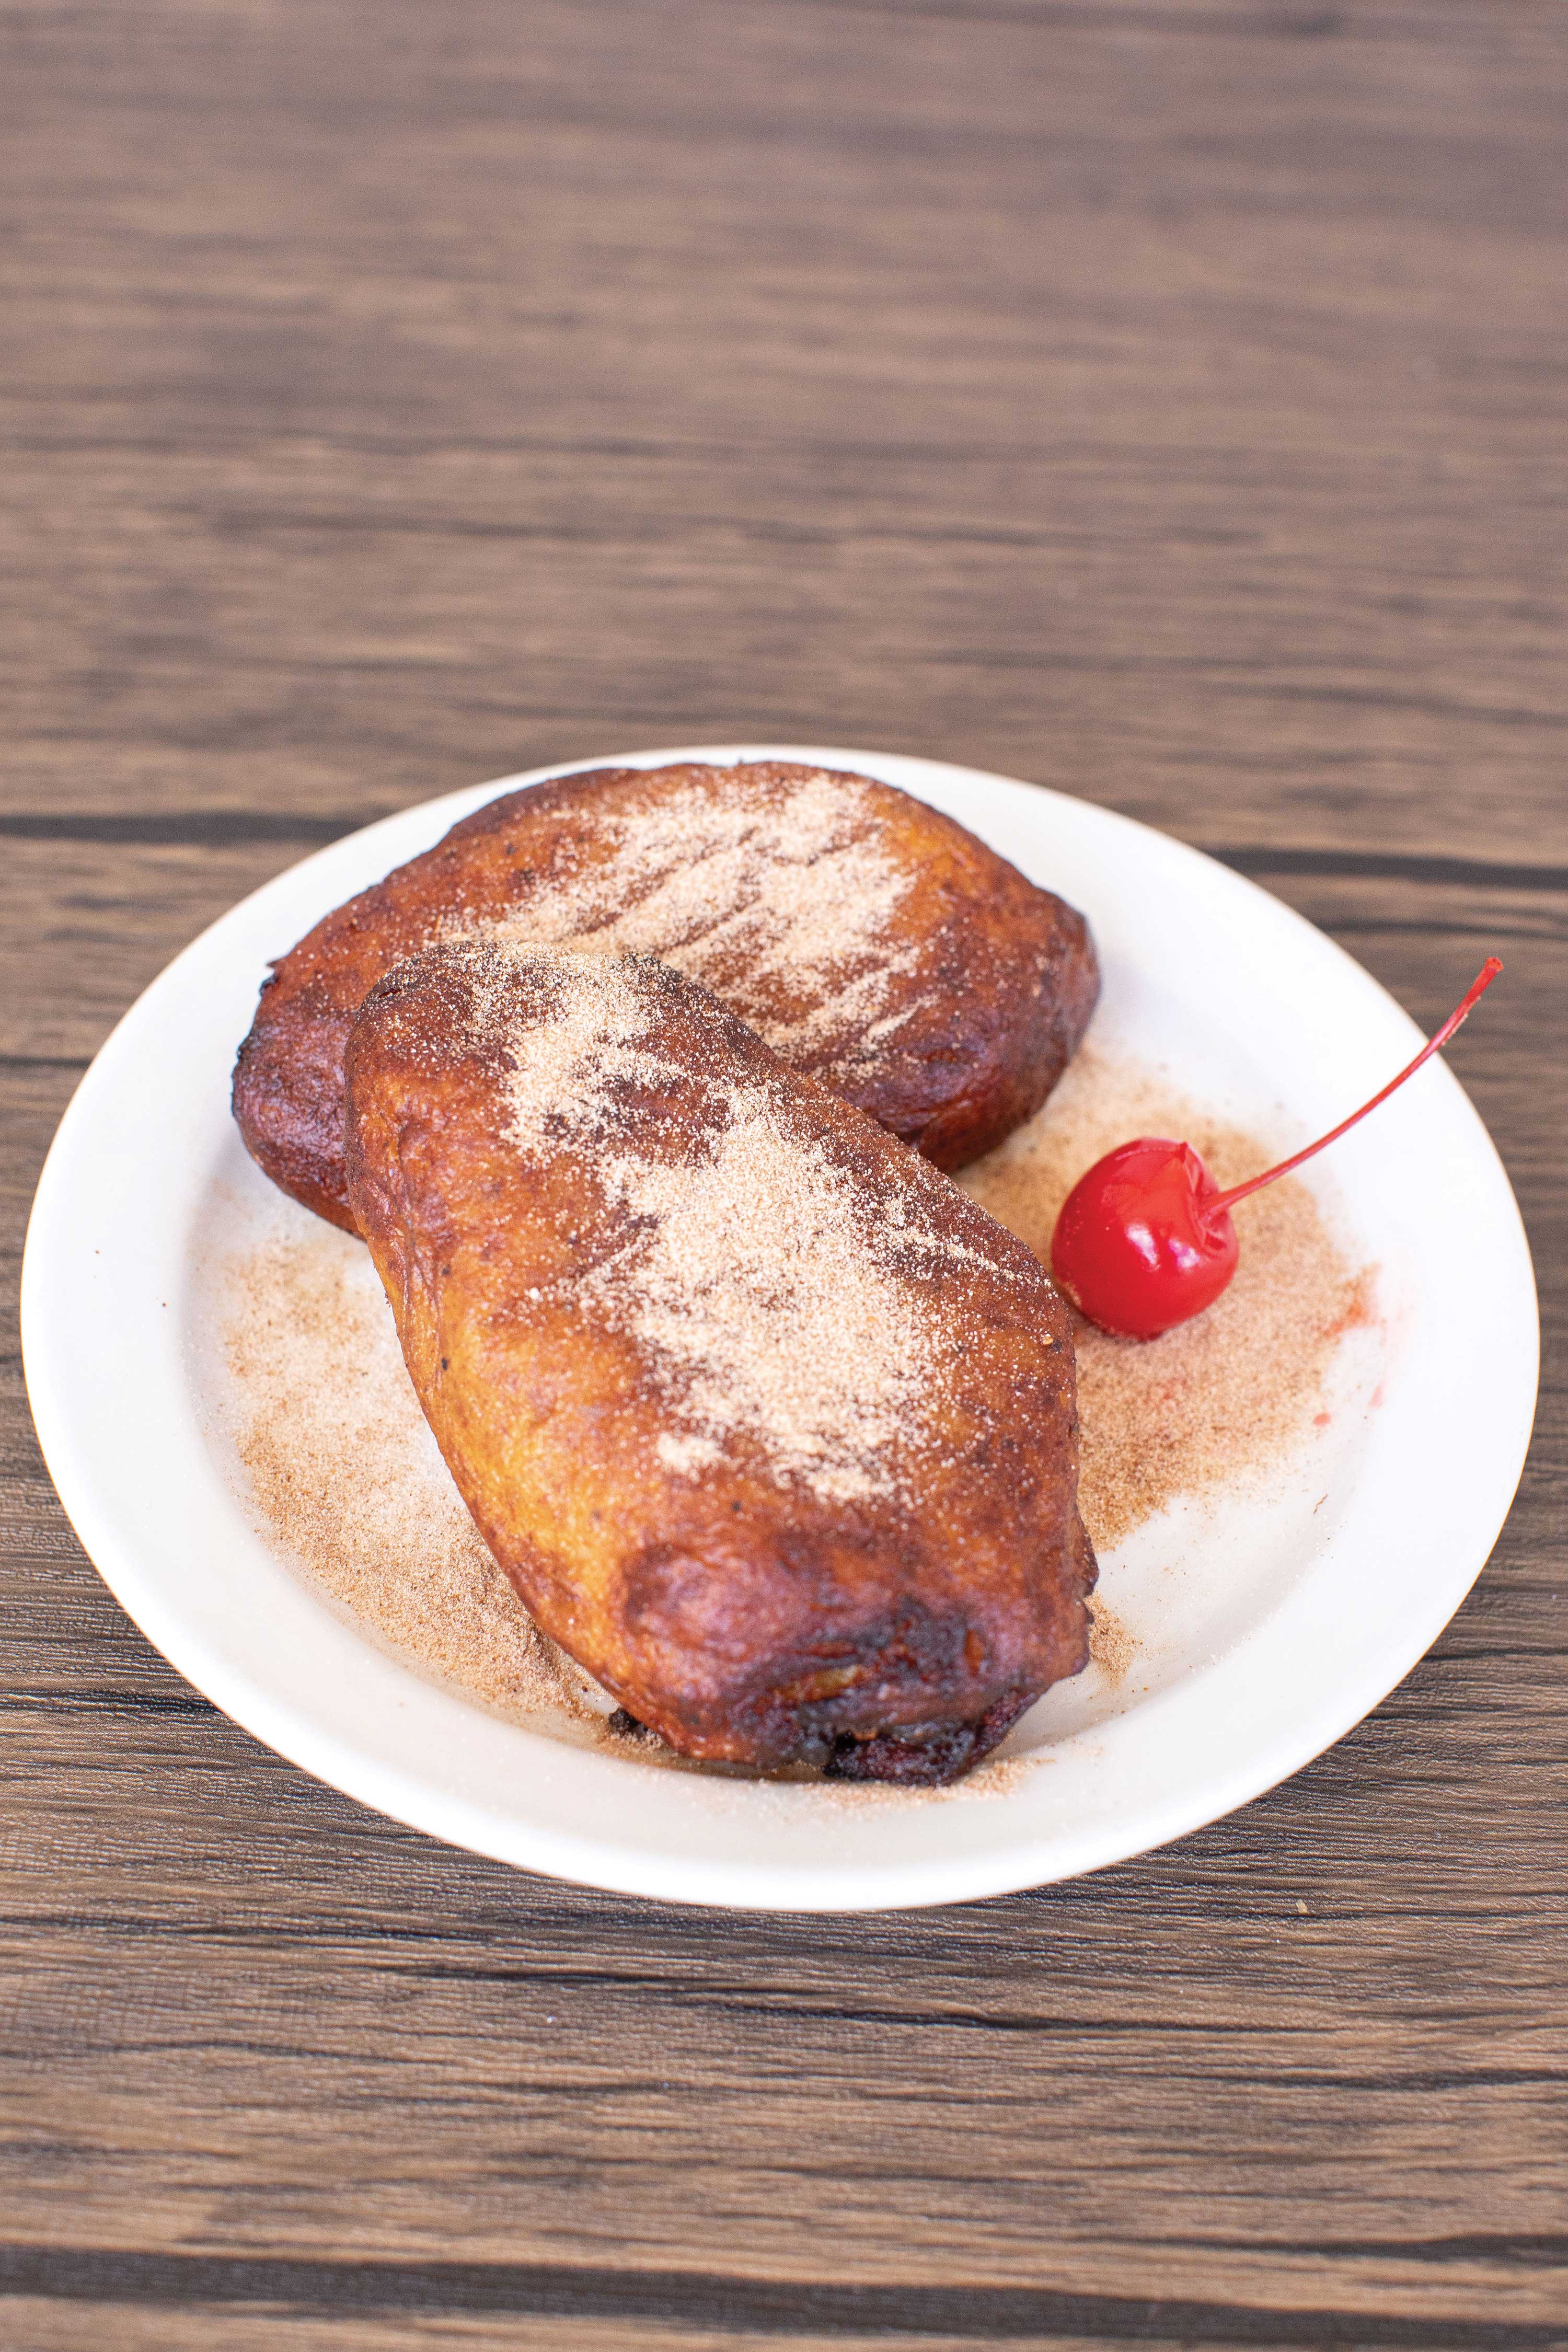 Image: Two brown turnovers are set on a white plate. They are sprinkled with cinnamon sugar and topped with a cherry.